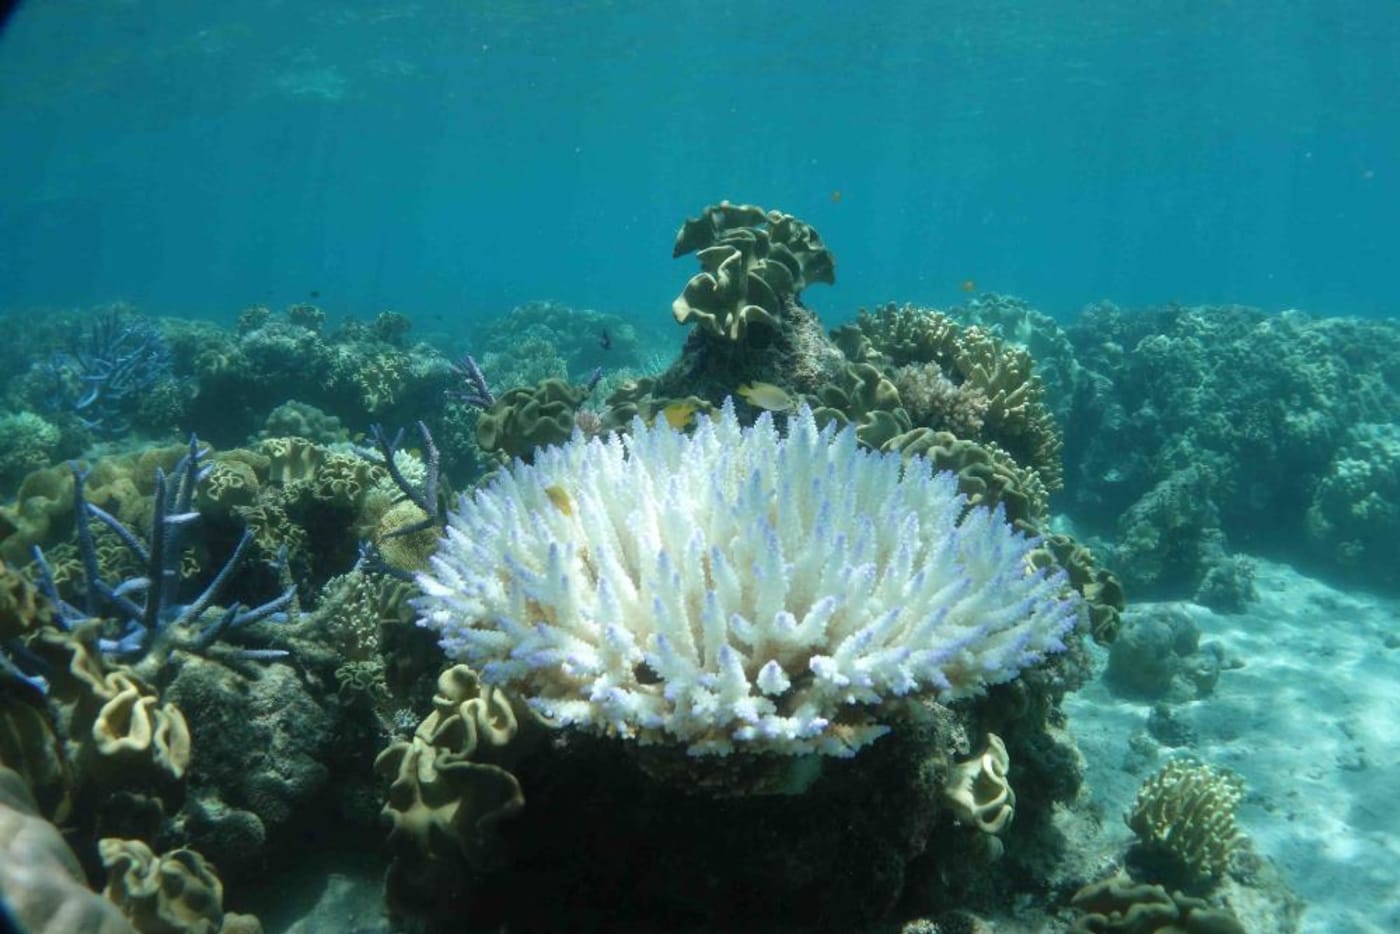 Photograph of bleached corals along the eastern coast of Brazil